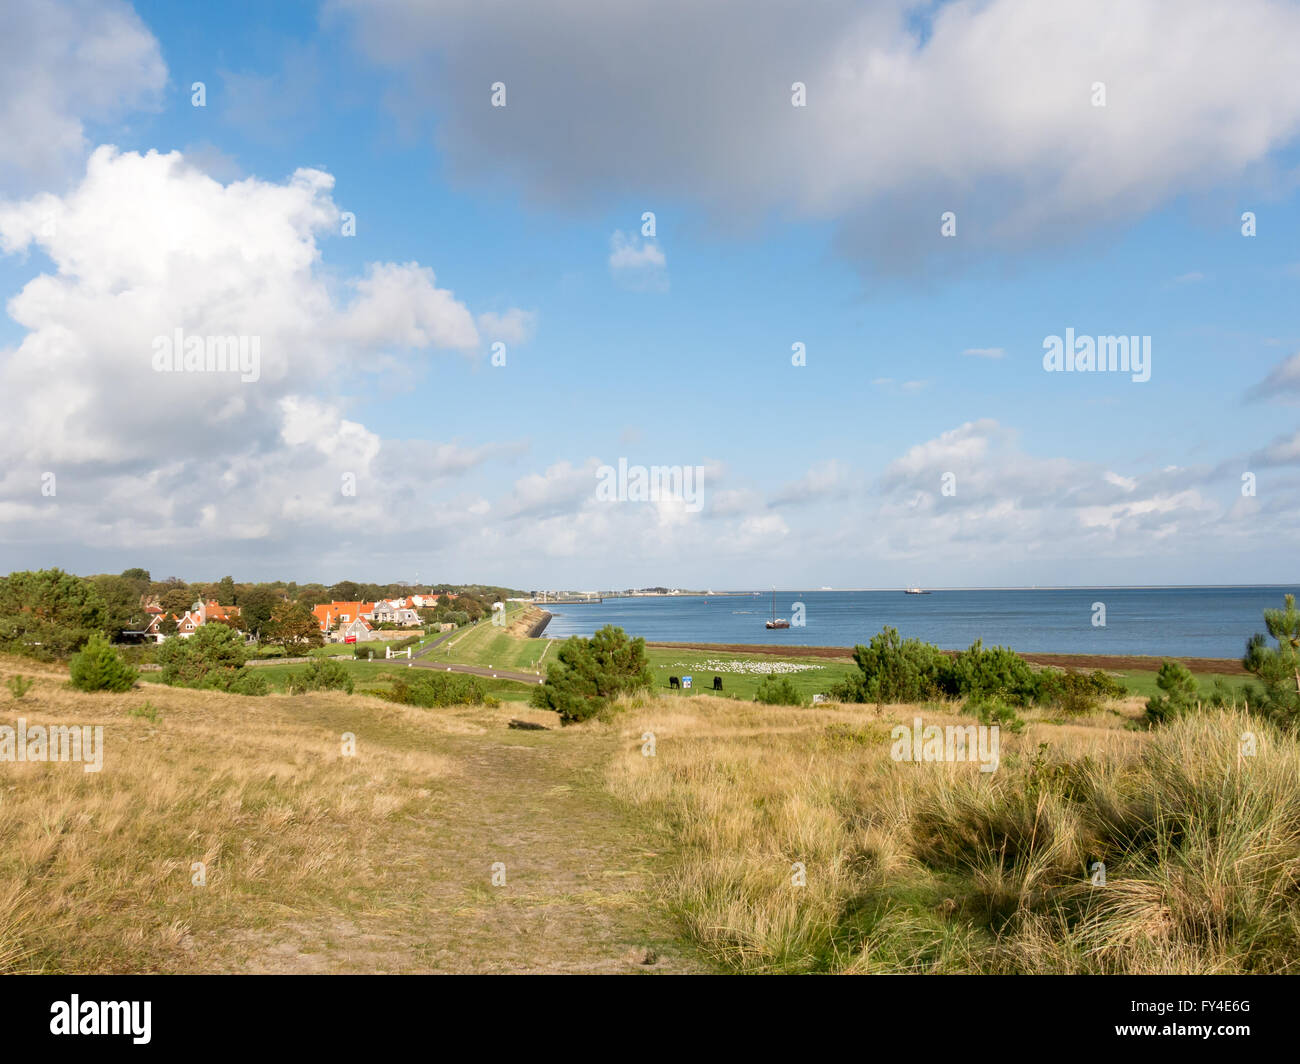 Panoramic view of Frisian island Vlieland and Waddensea in the province of Friesland, Netherlands Stock Photo